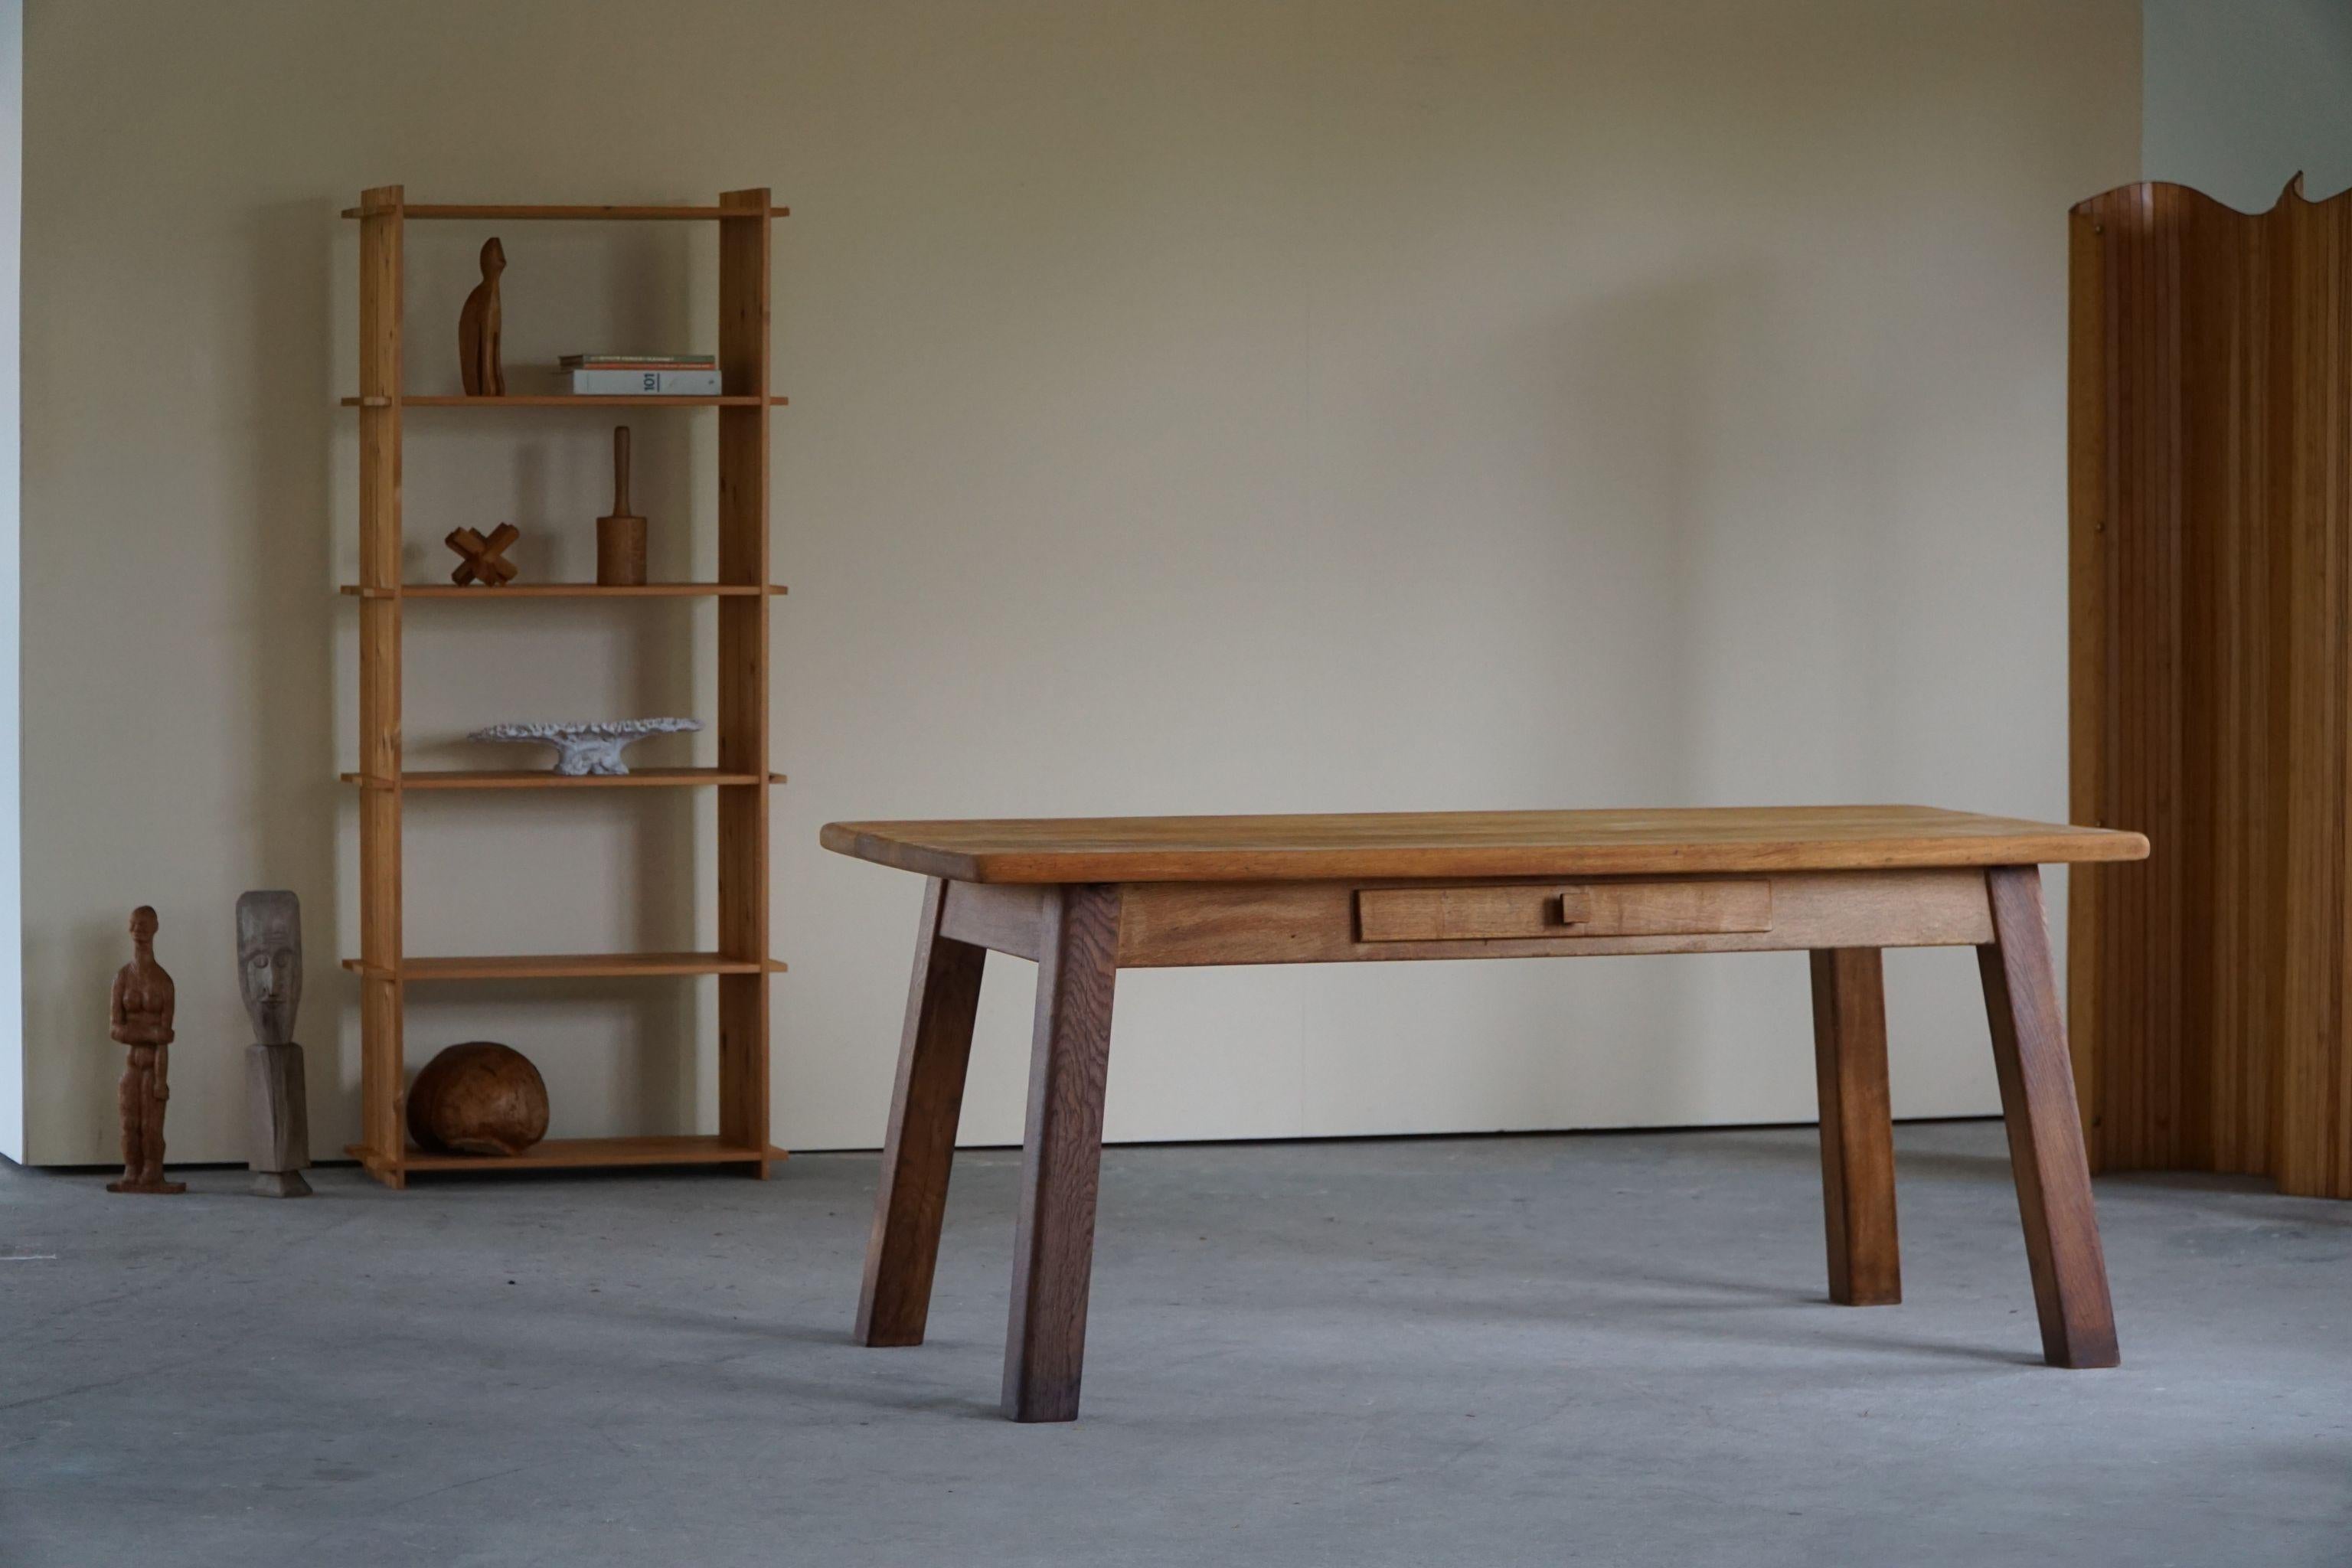 20th Century French Modern Rectangular Brutalist Desk / Dining Table in Solid Oak, 1950s